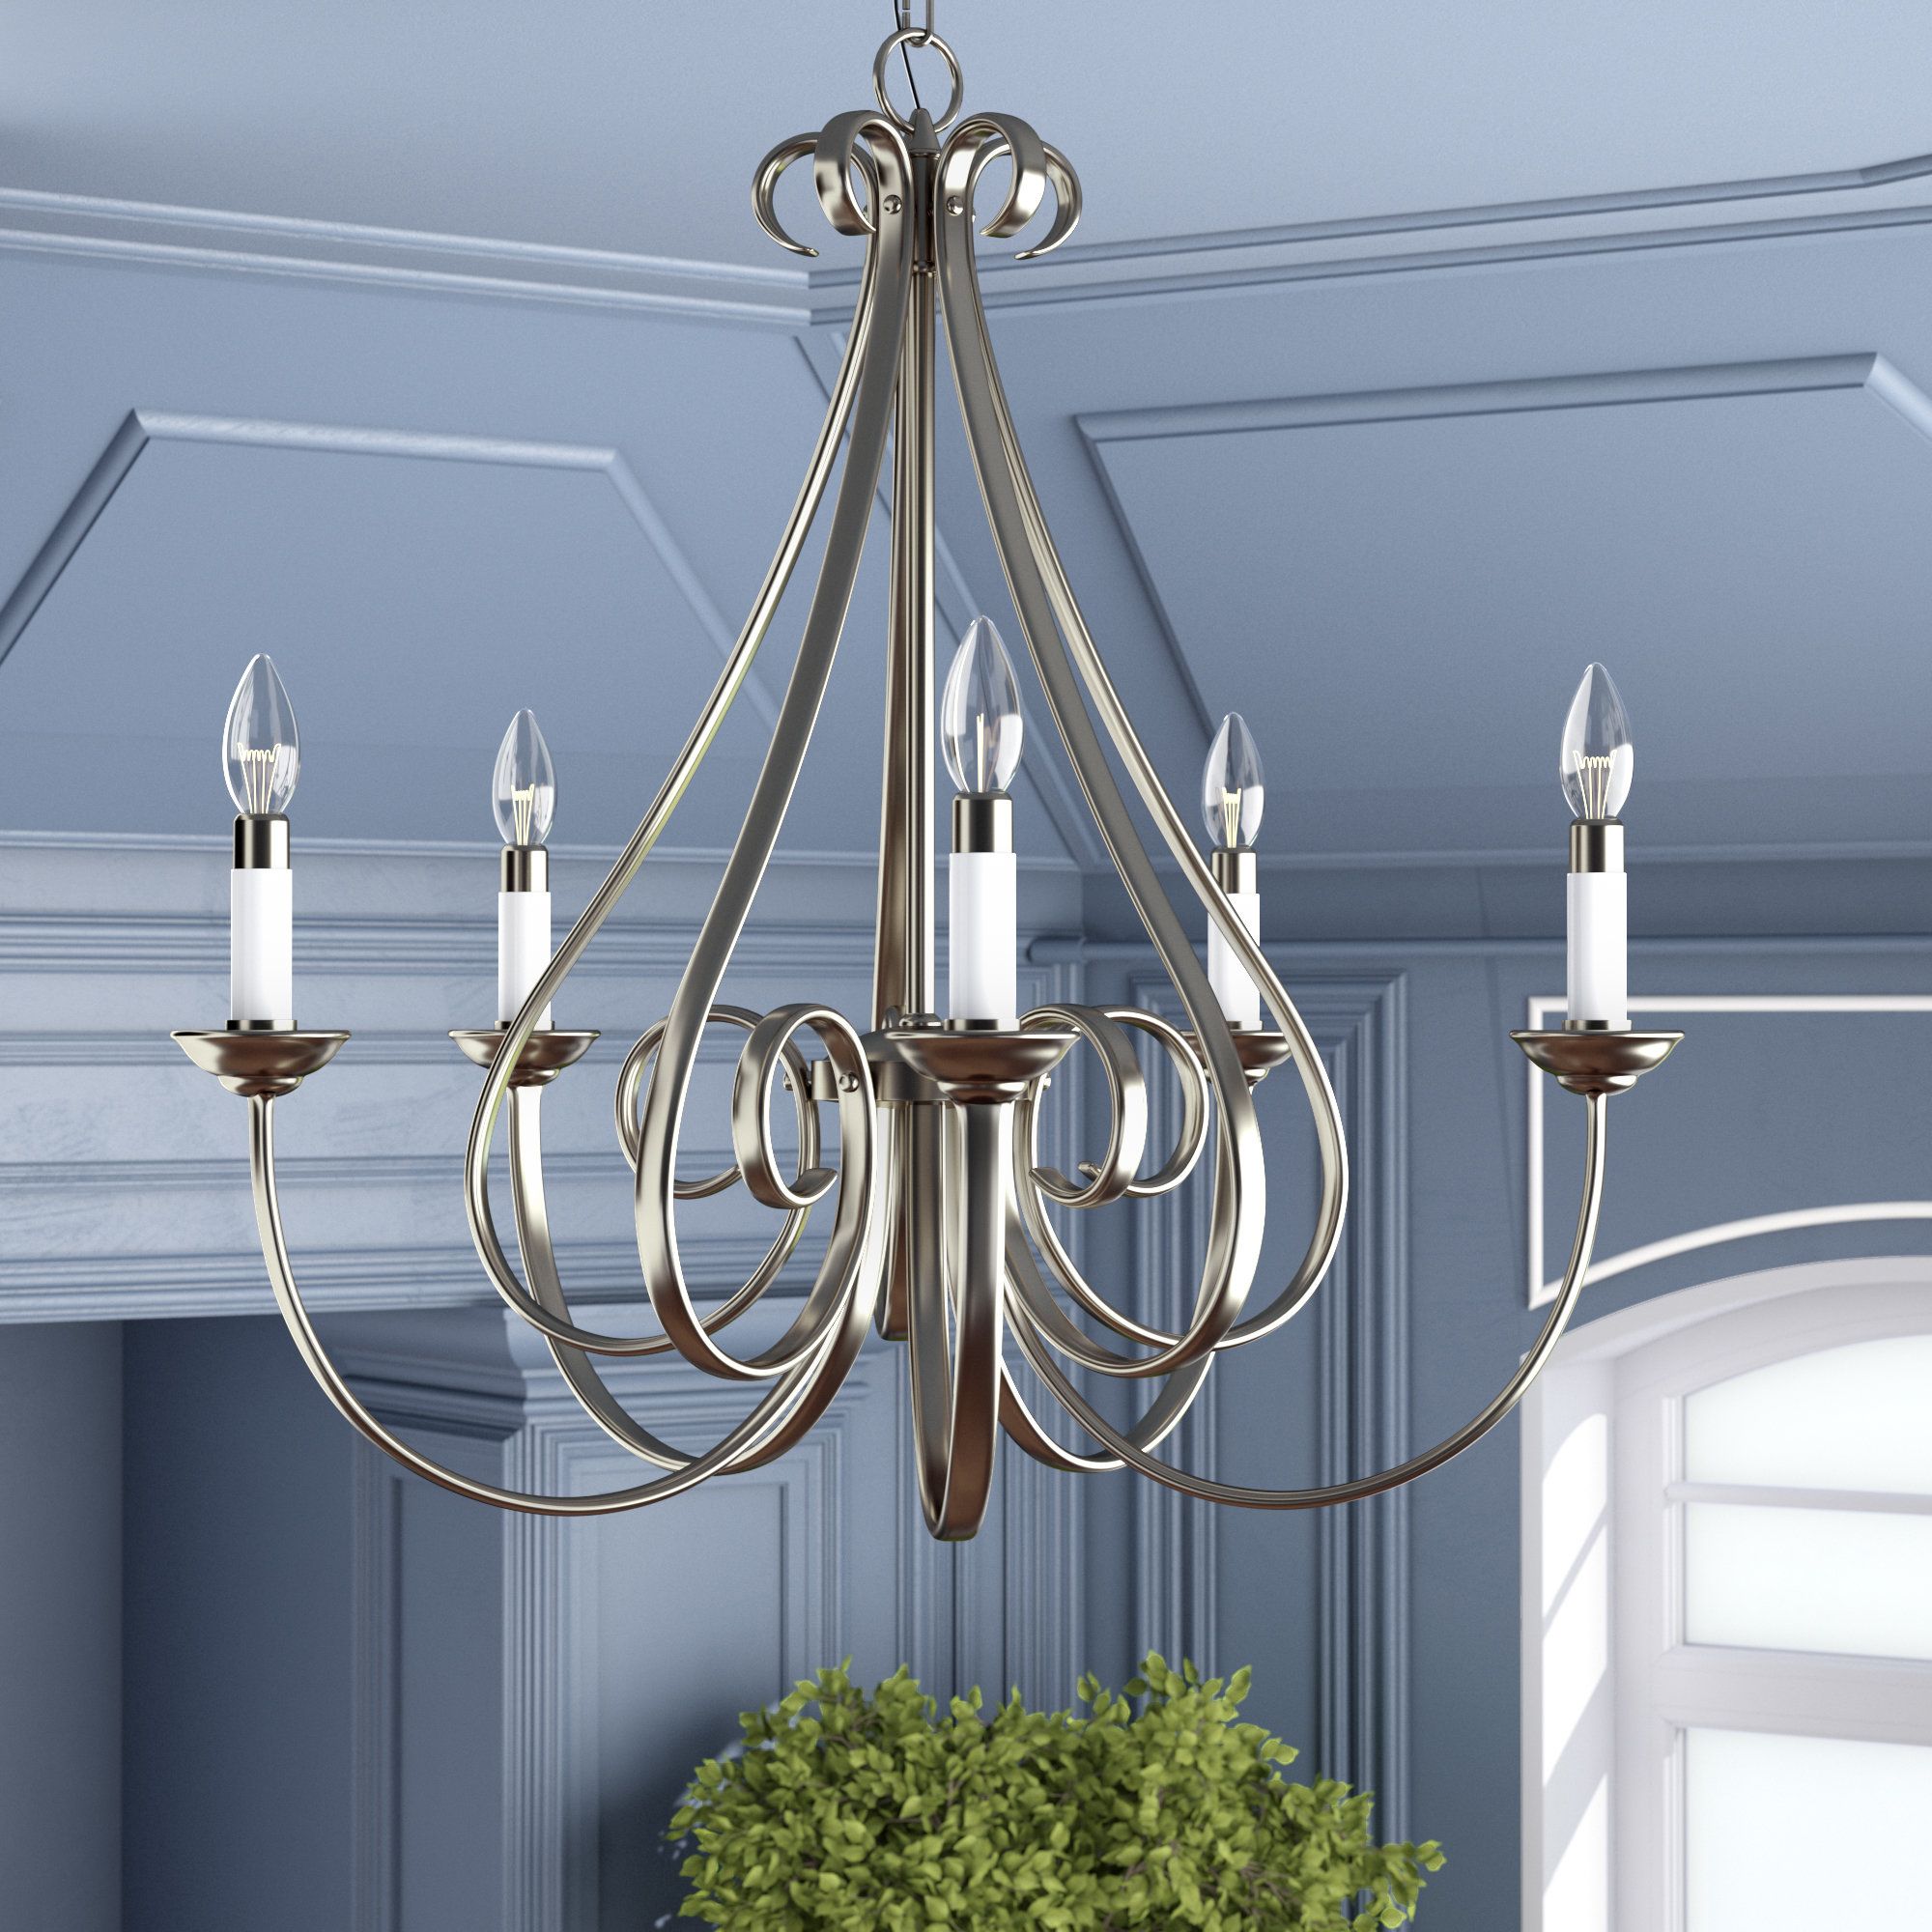 Cayman 5 Light Candle Style Chandelier Throughout Recent Berger 5 Light Candle Style Chandeliers (View 8 of 25)